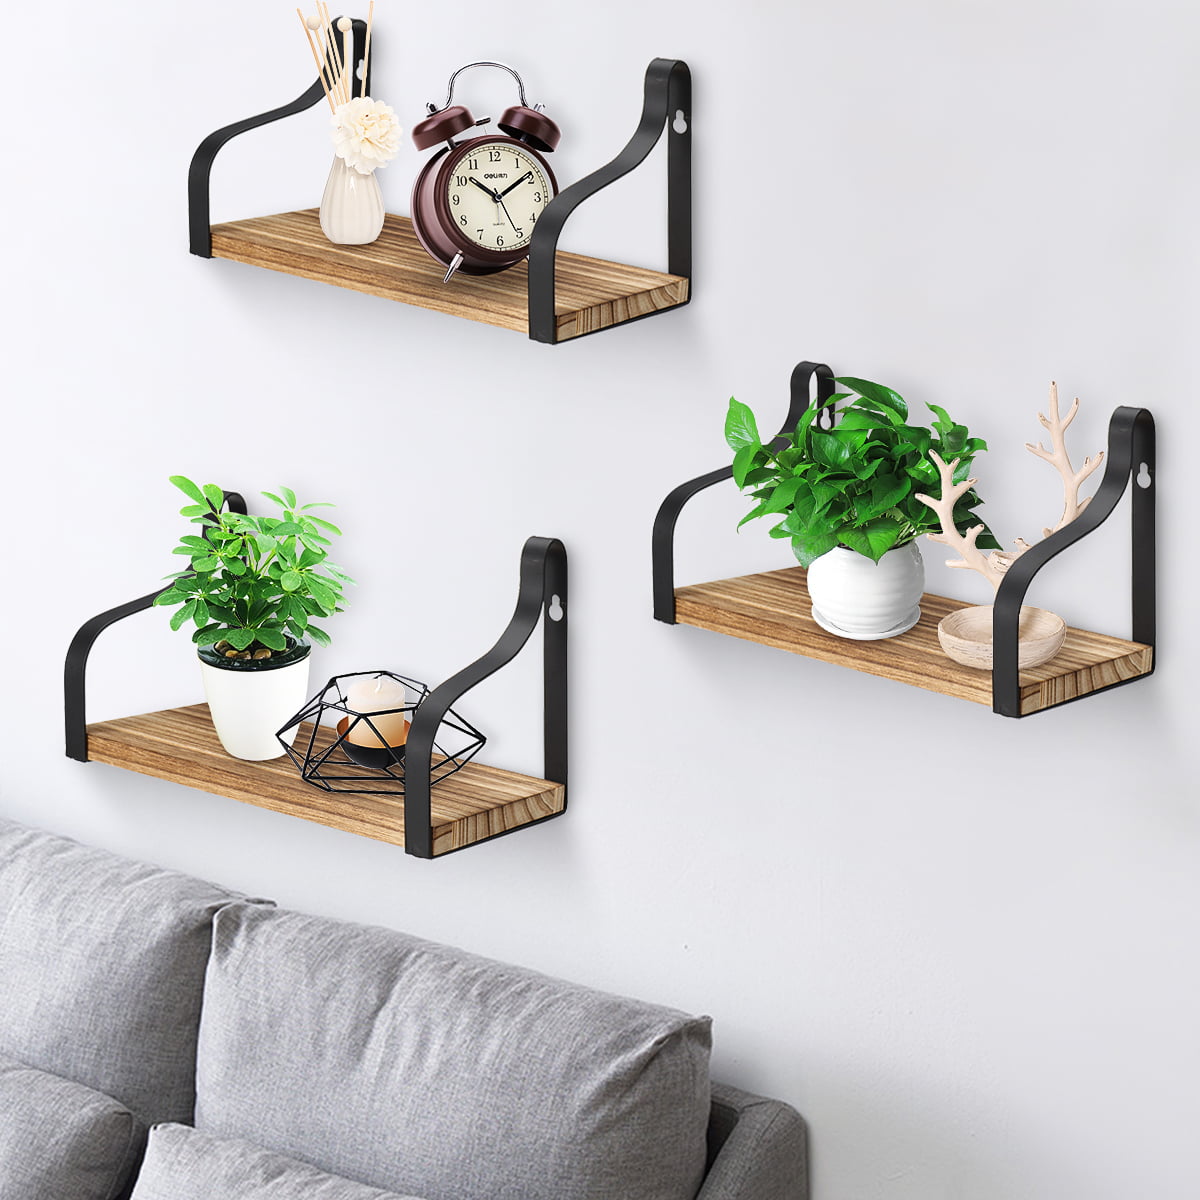 Details about   3 PCS Rustic Wood Wall Storage Shelves for Bedroom Living Room Bathroom Office